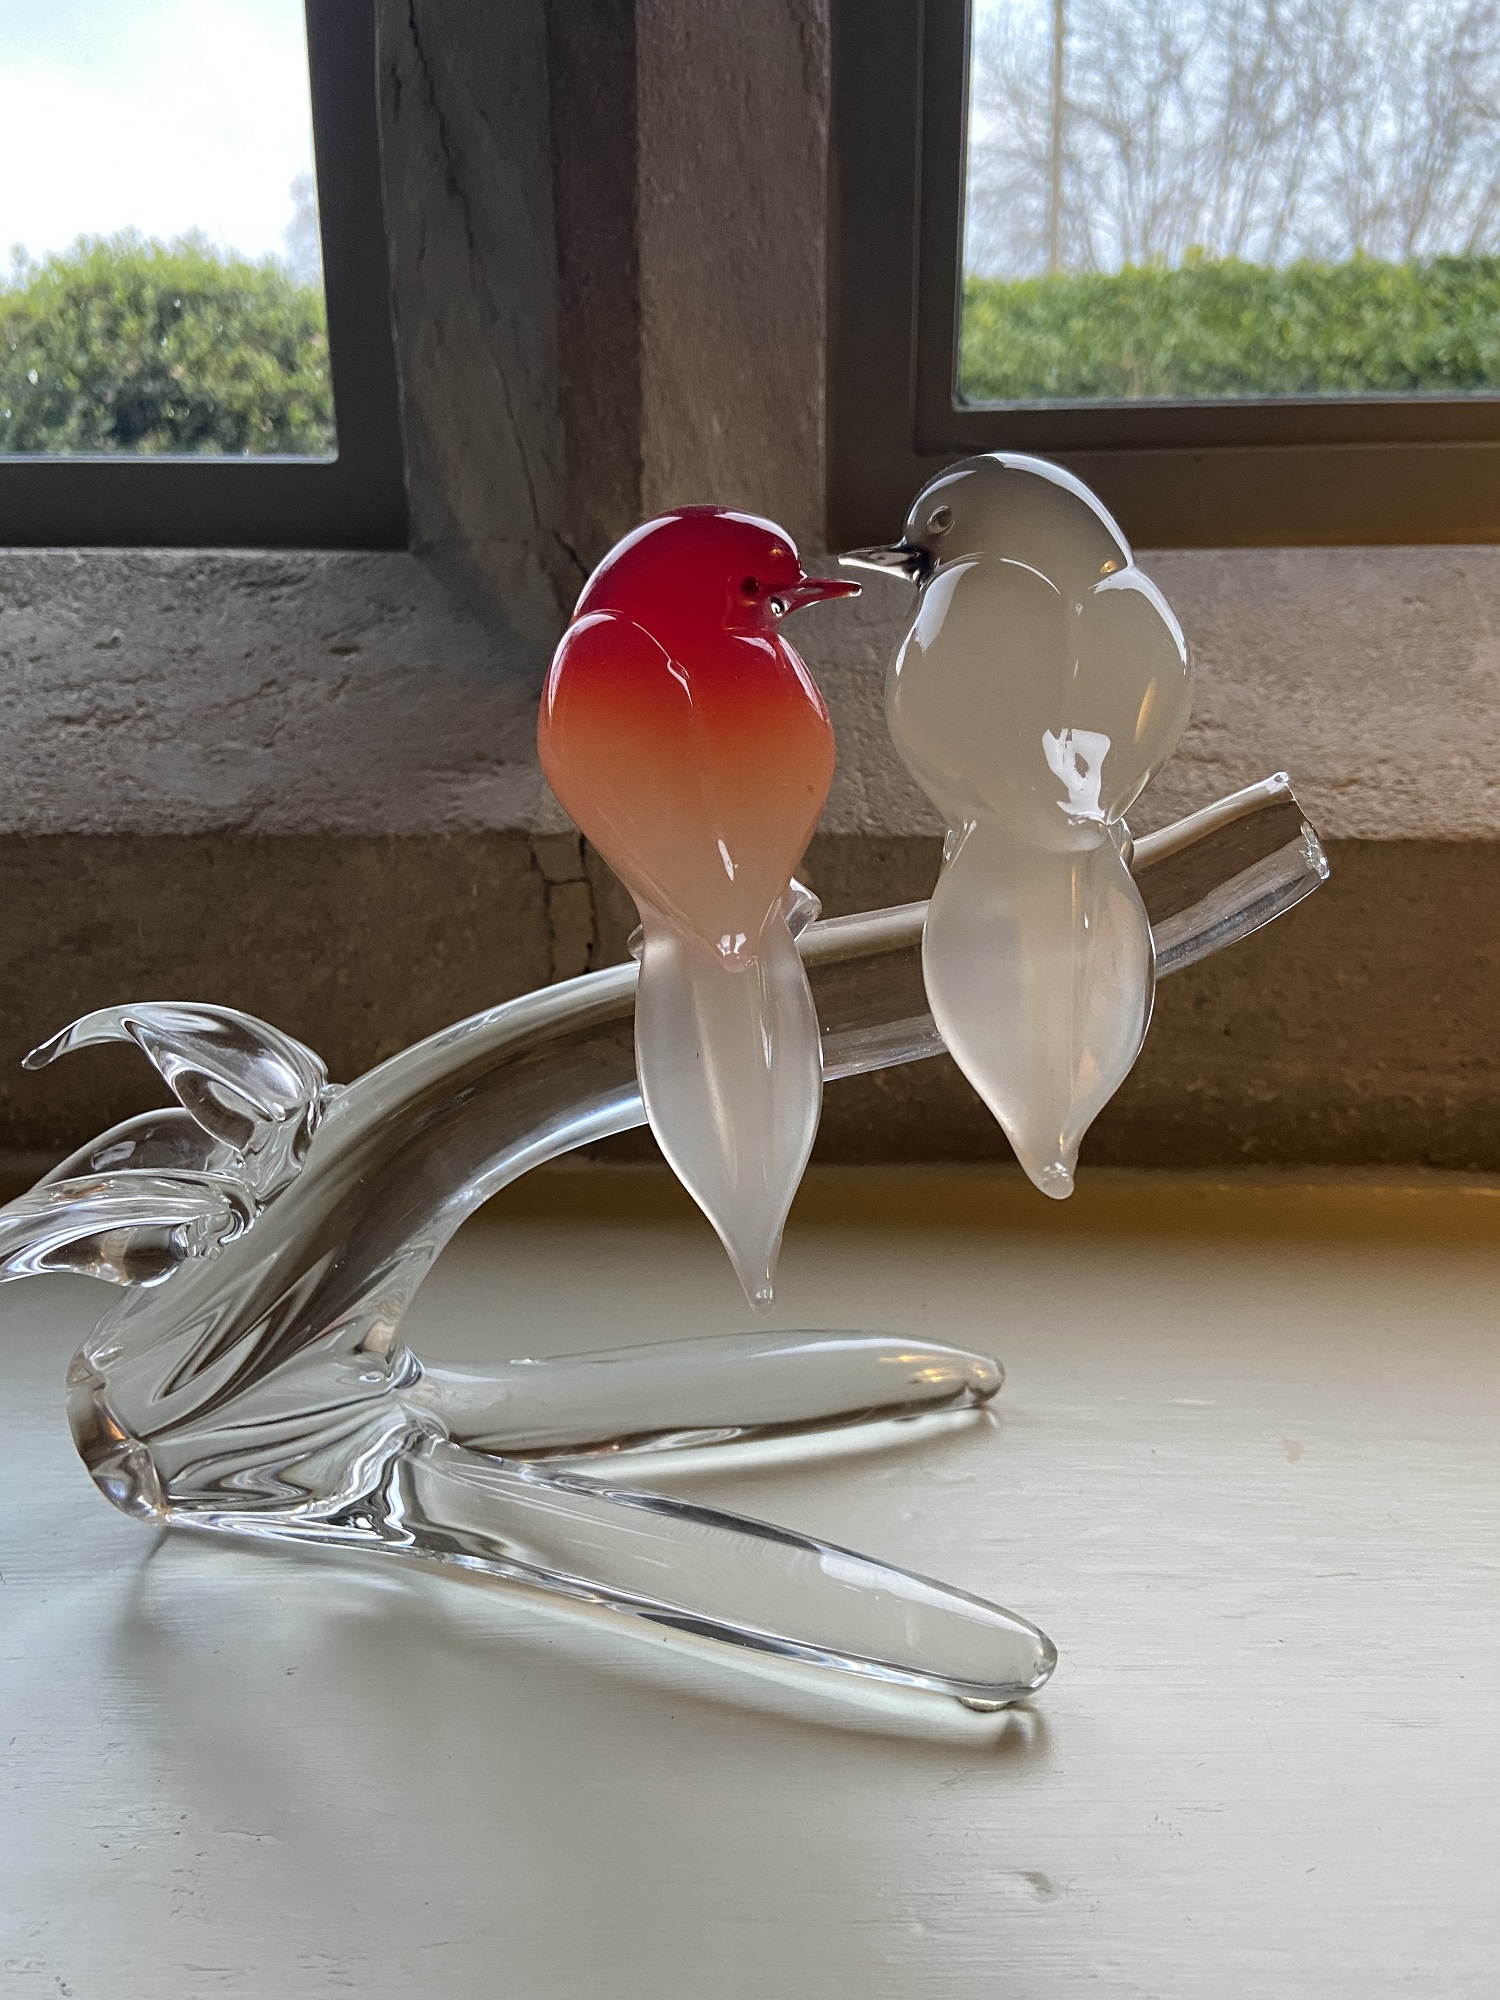 https://foxhousefineart.co.uk/public/images/view%20of%20the%20Cotswolds/Murano%20birds%201.JPG